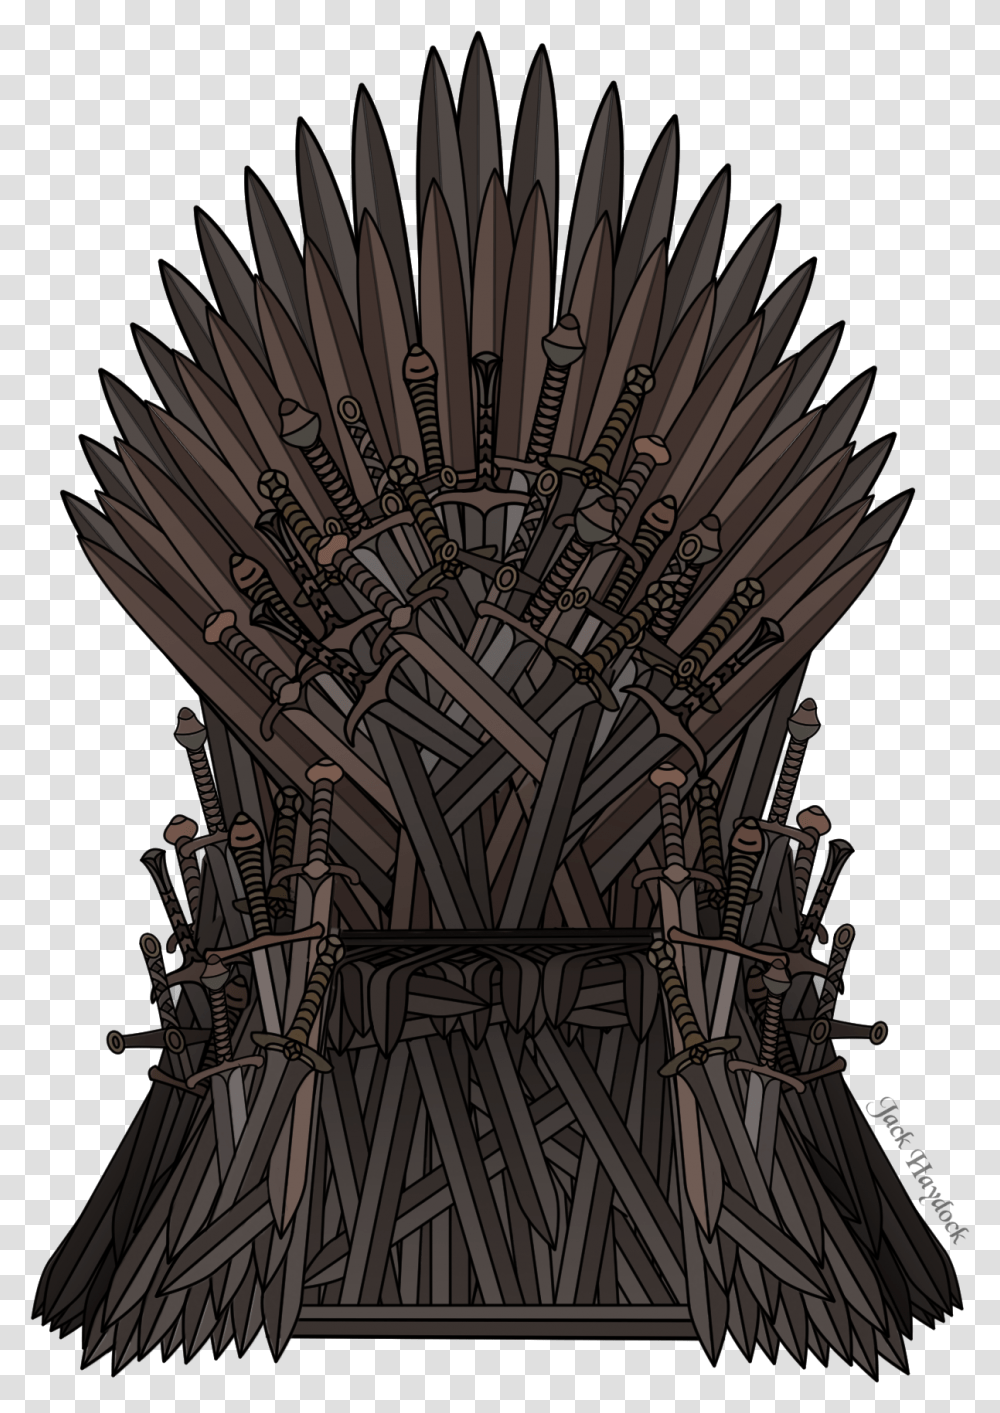 Rick Of Thrones Throne, Furniture, Chair, Table, Poster Transparent Png